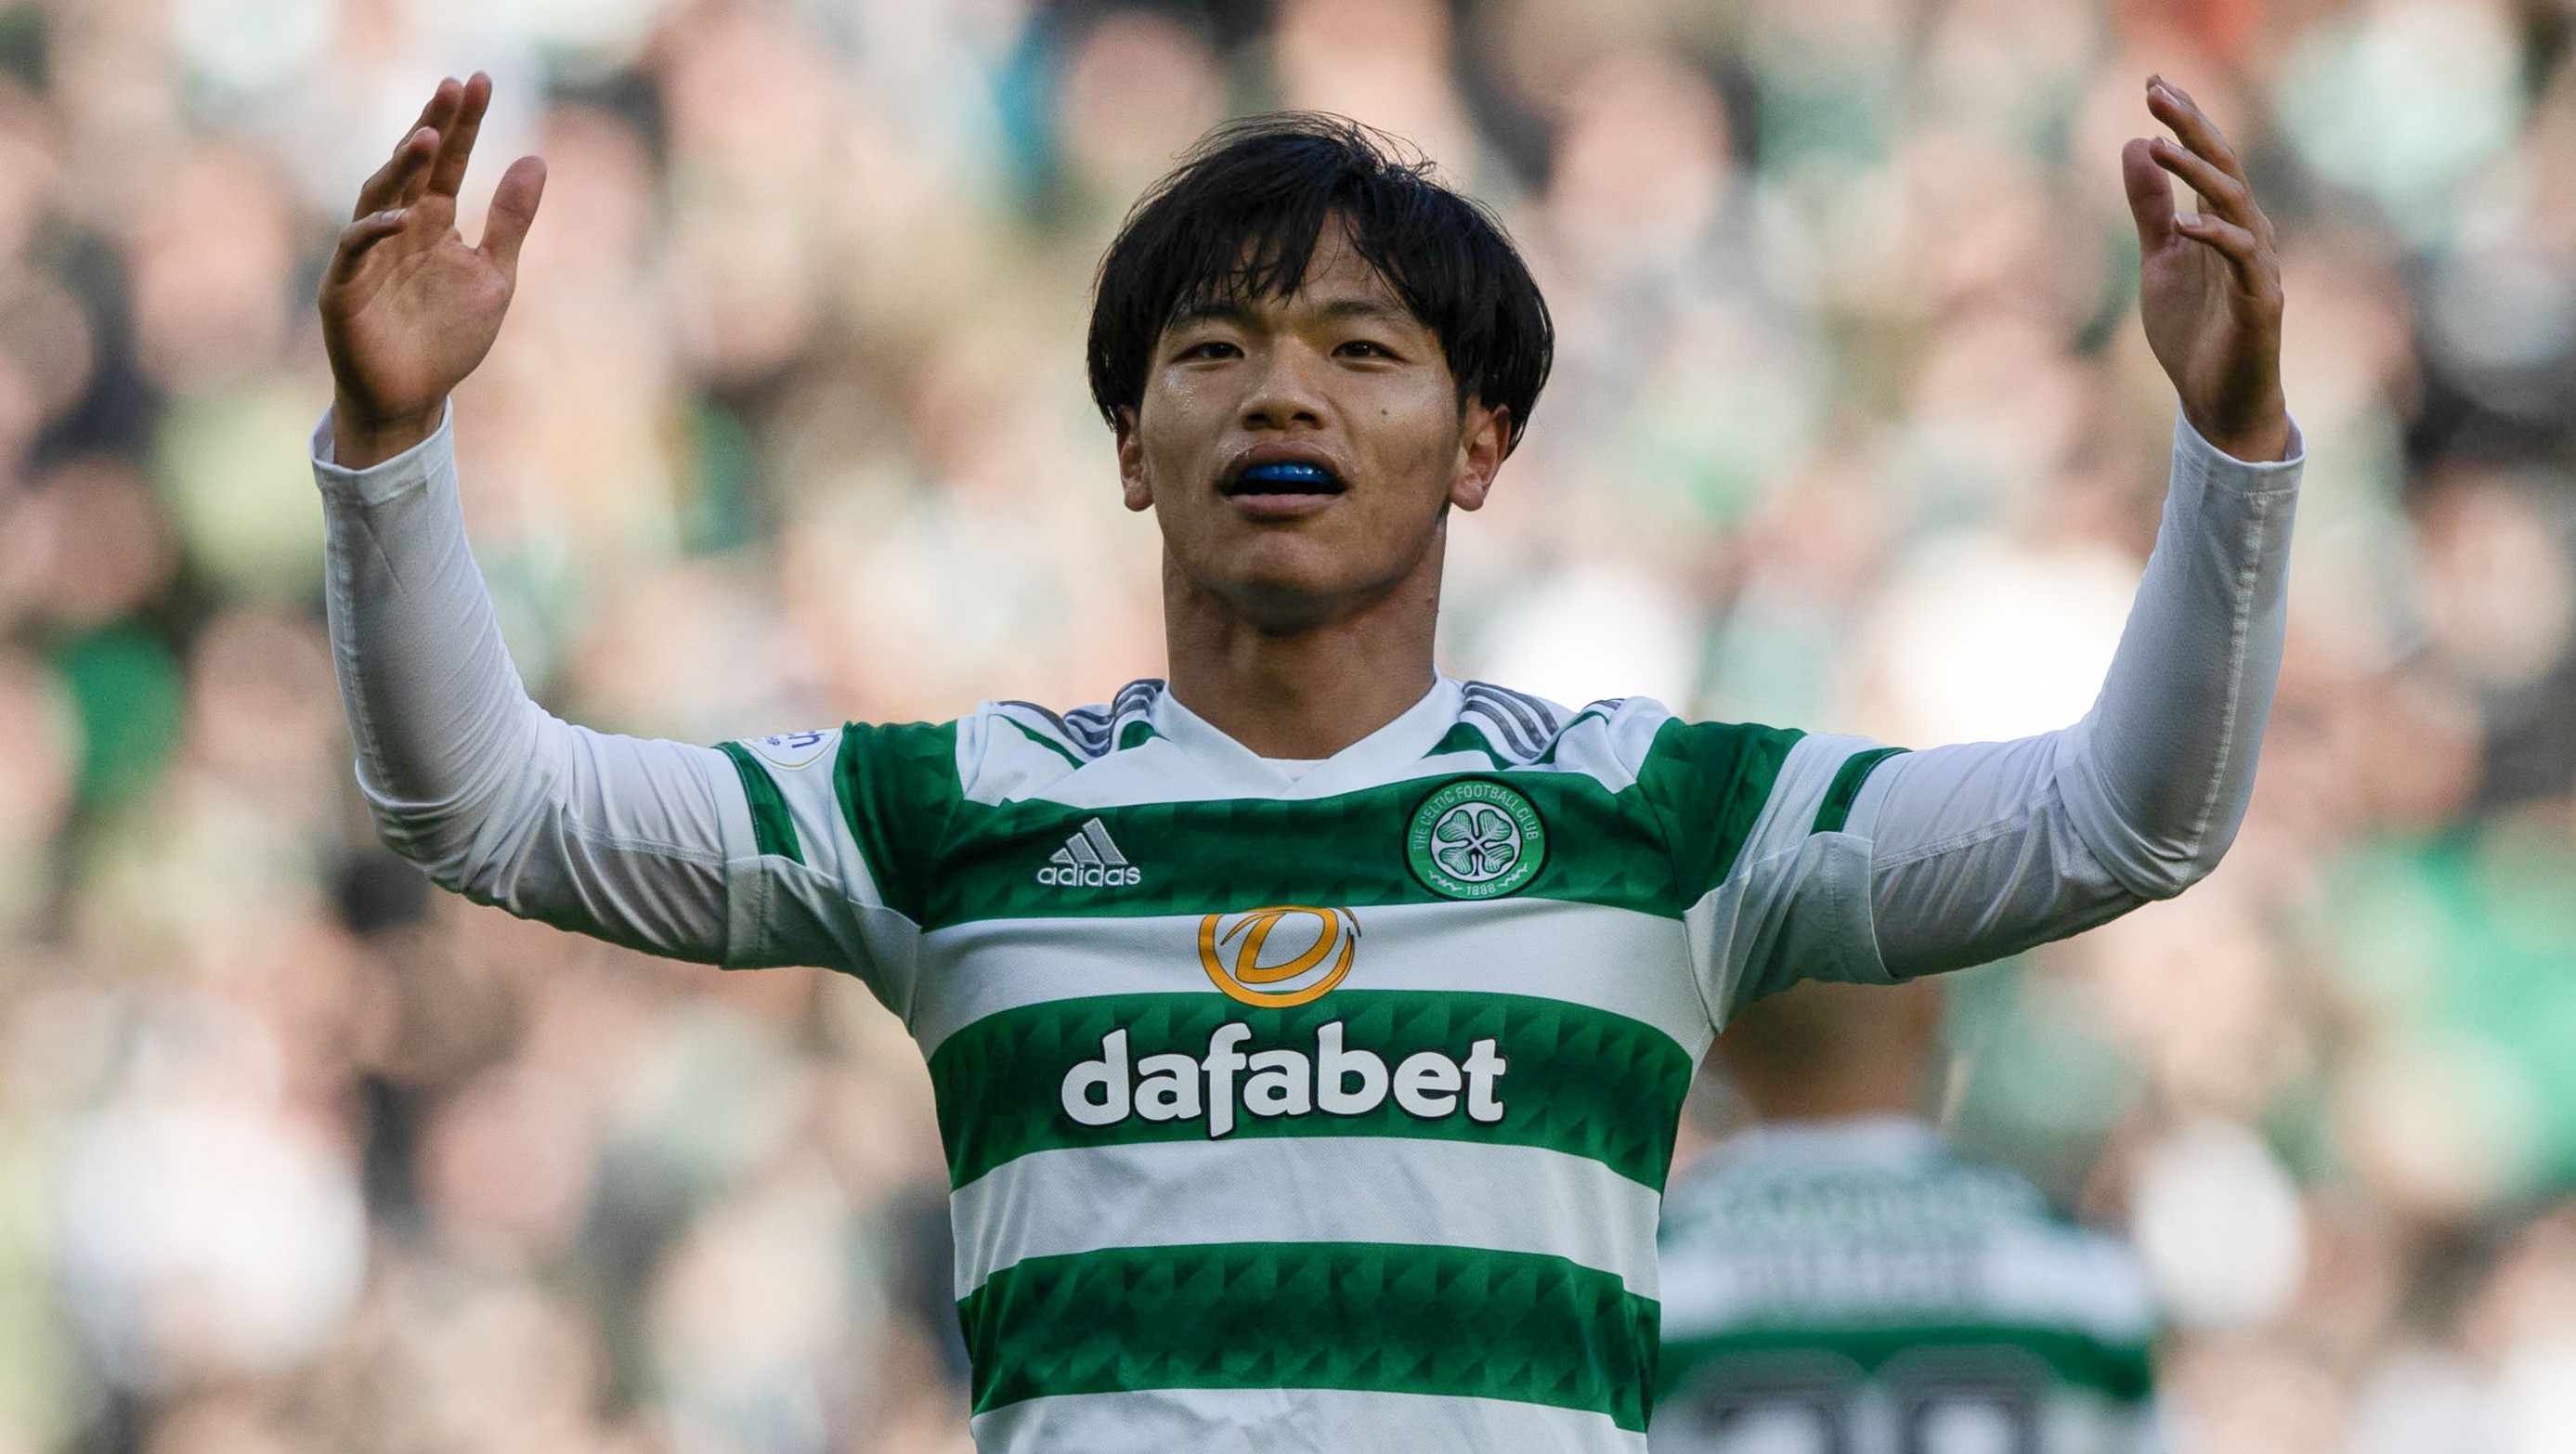 There have been 15 boys named Reo since Celtic signed midfielder Reo Hatate.